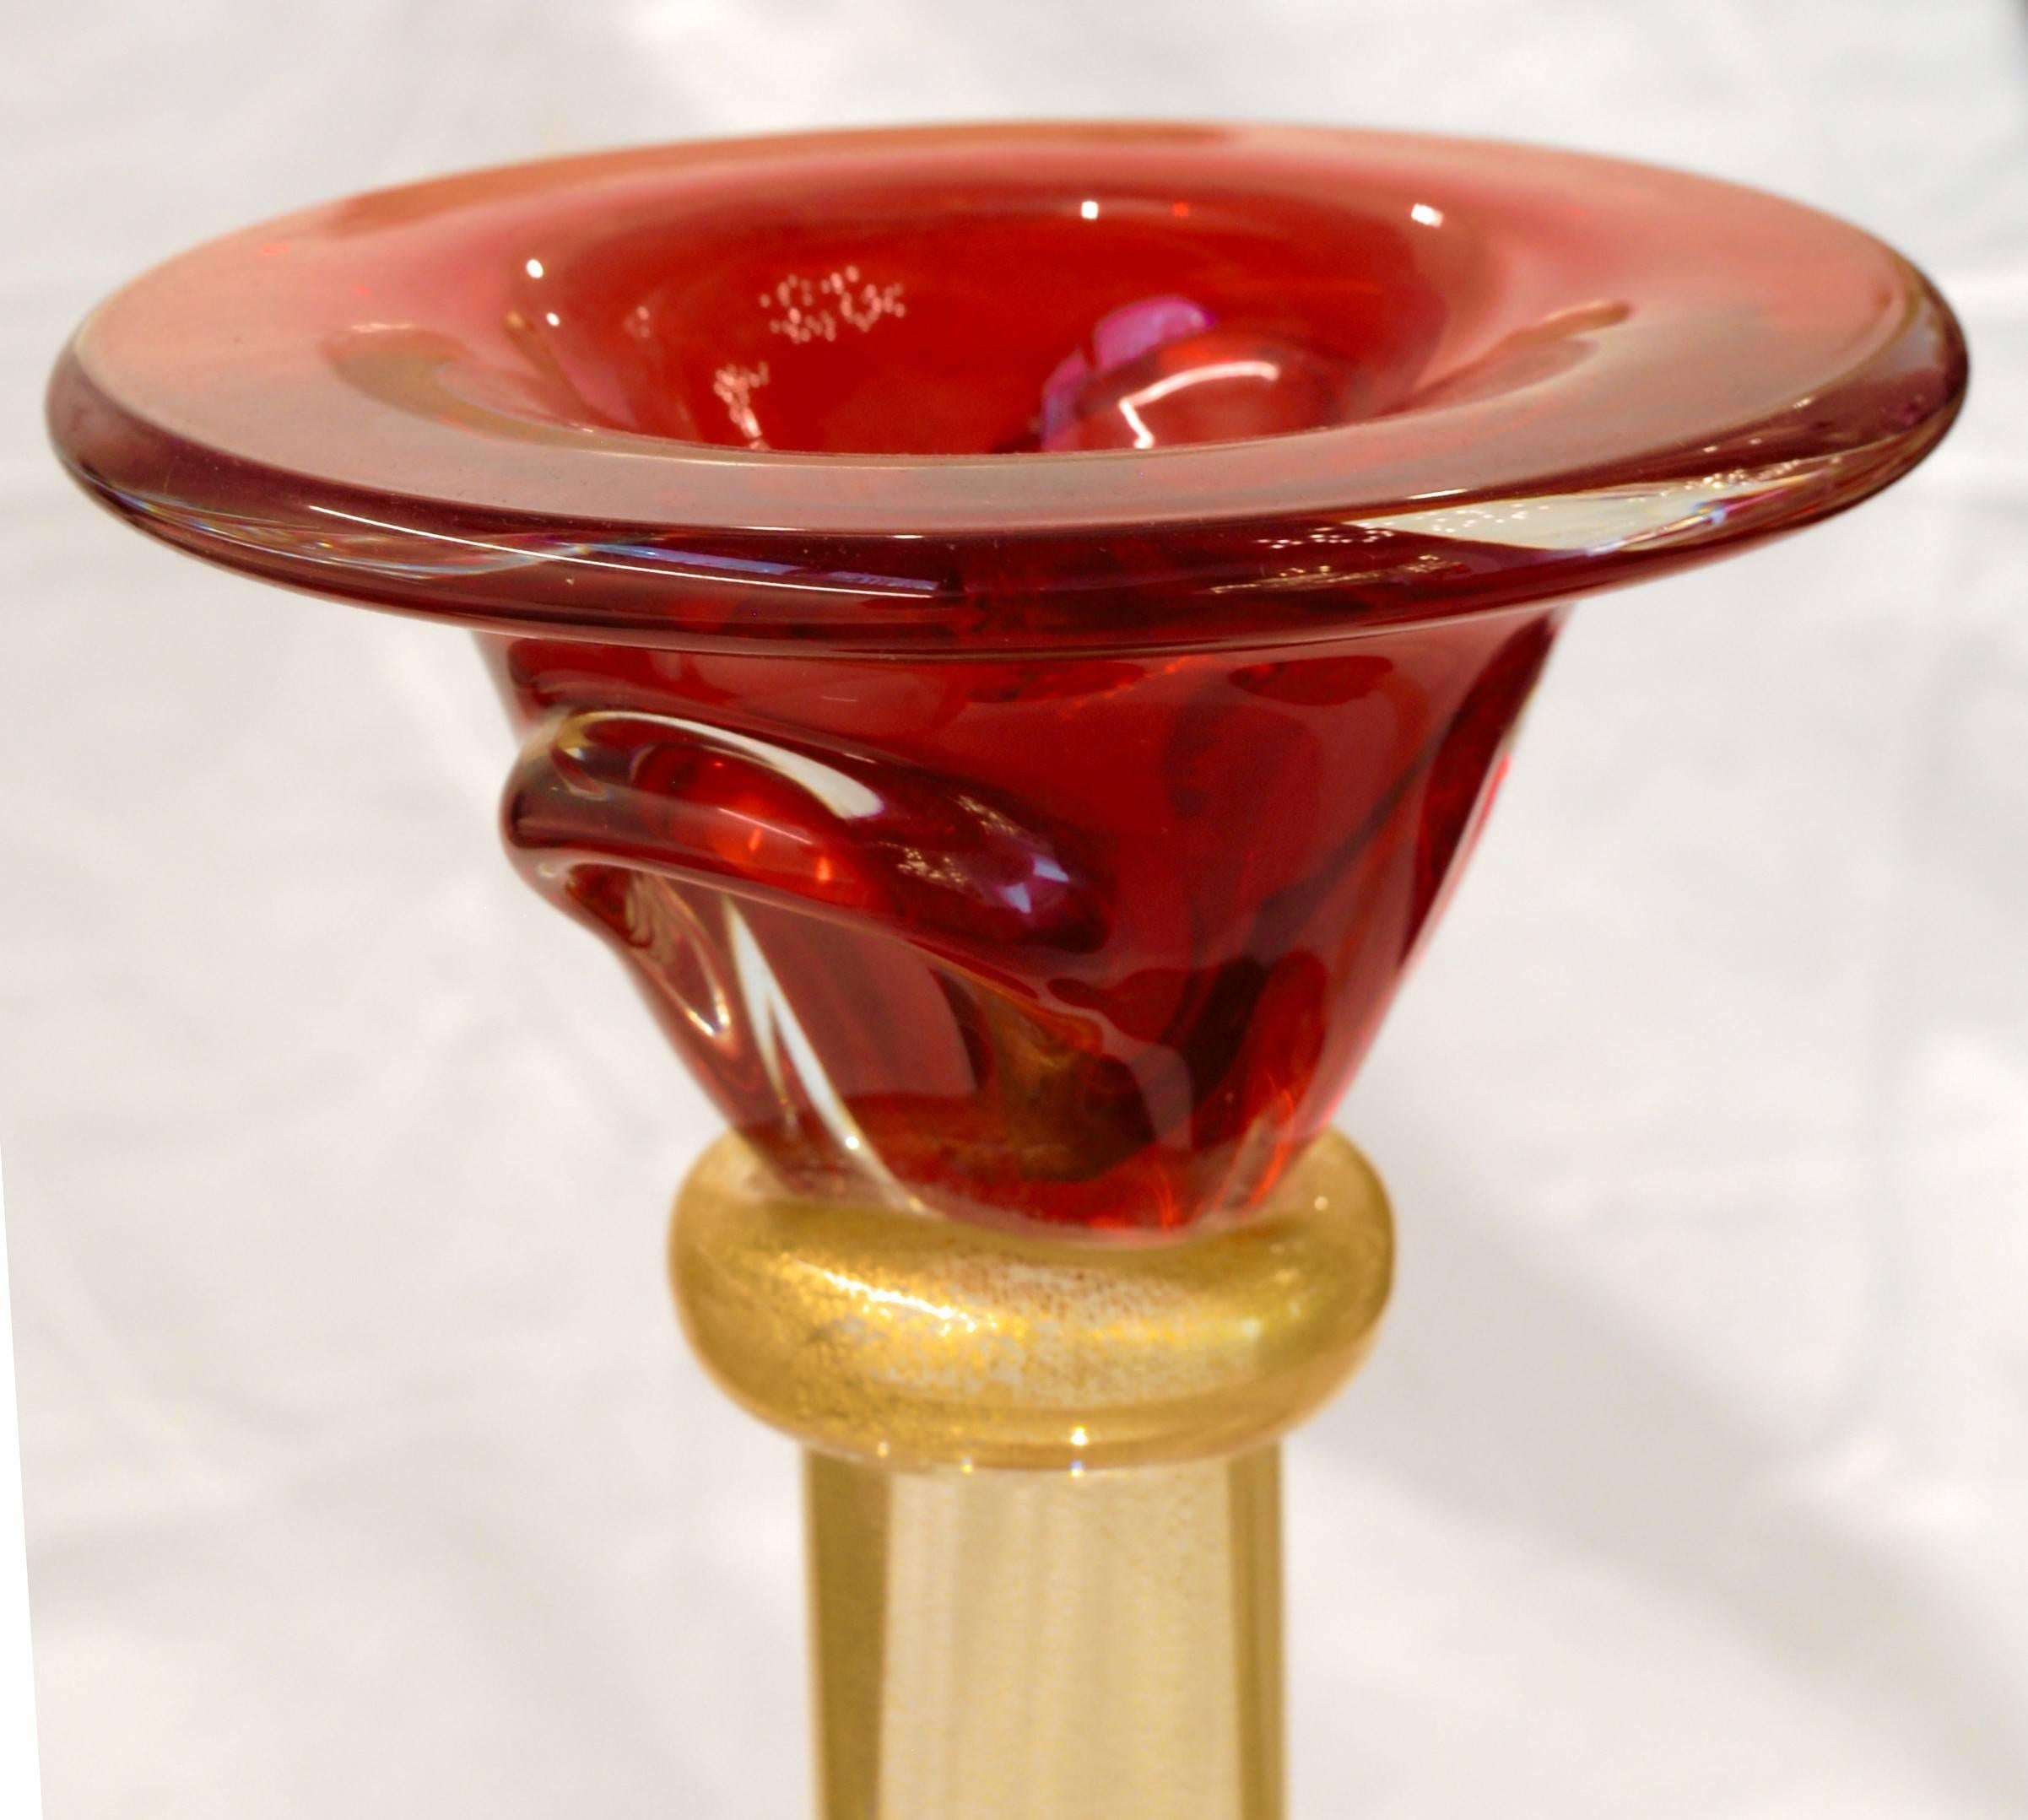 A pair of sumptuous candlesticks. Central stem is a cylindrical rod in gold leaf, base and top in red clear glass and connecting collars in gold leaf. 
Tall, heavy and awesome, on a console or a dining table celebration set up.

Romano Dona,